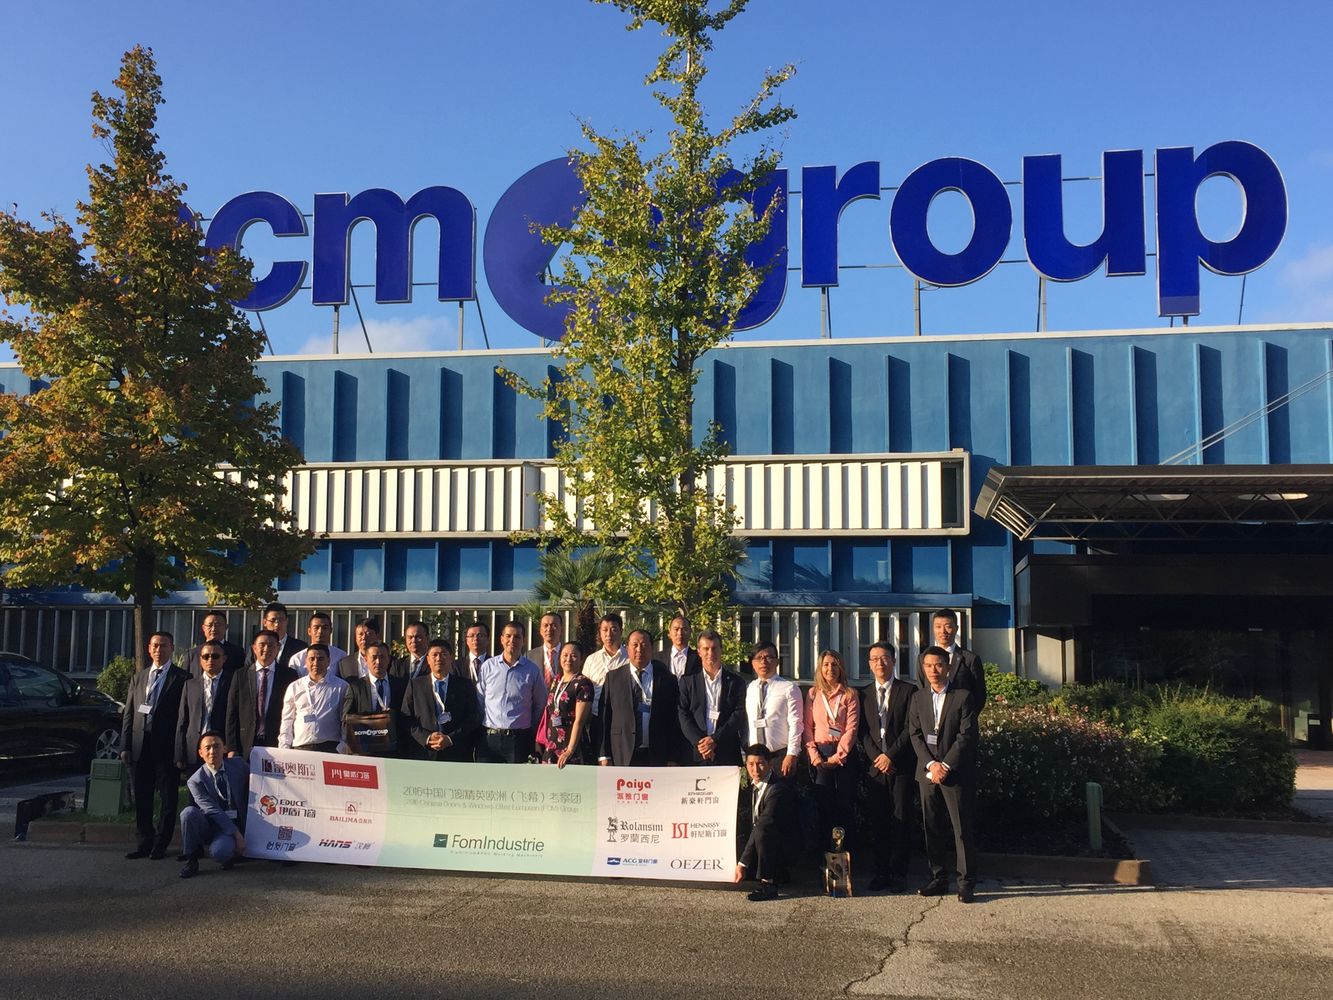 Chinese delegation @ the Scm Group HQ